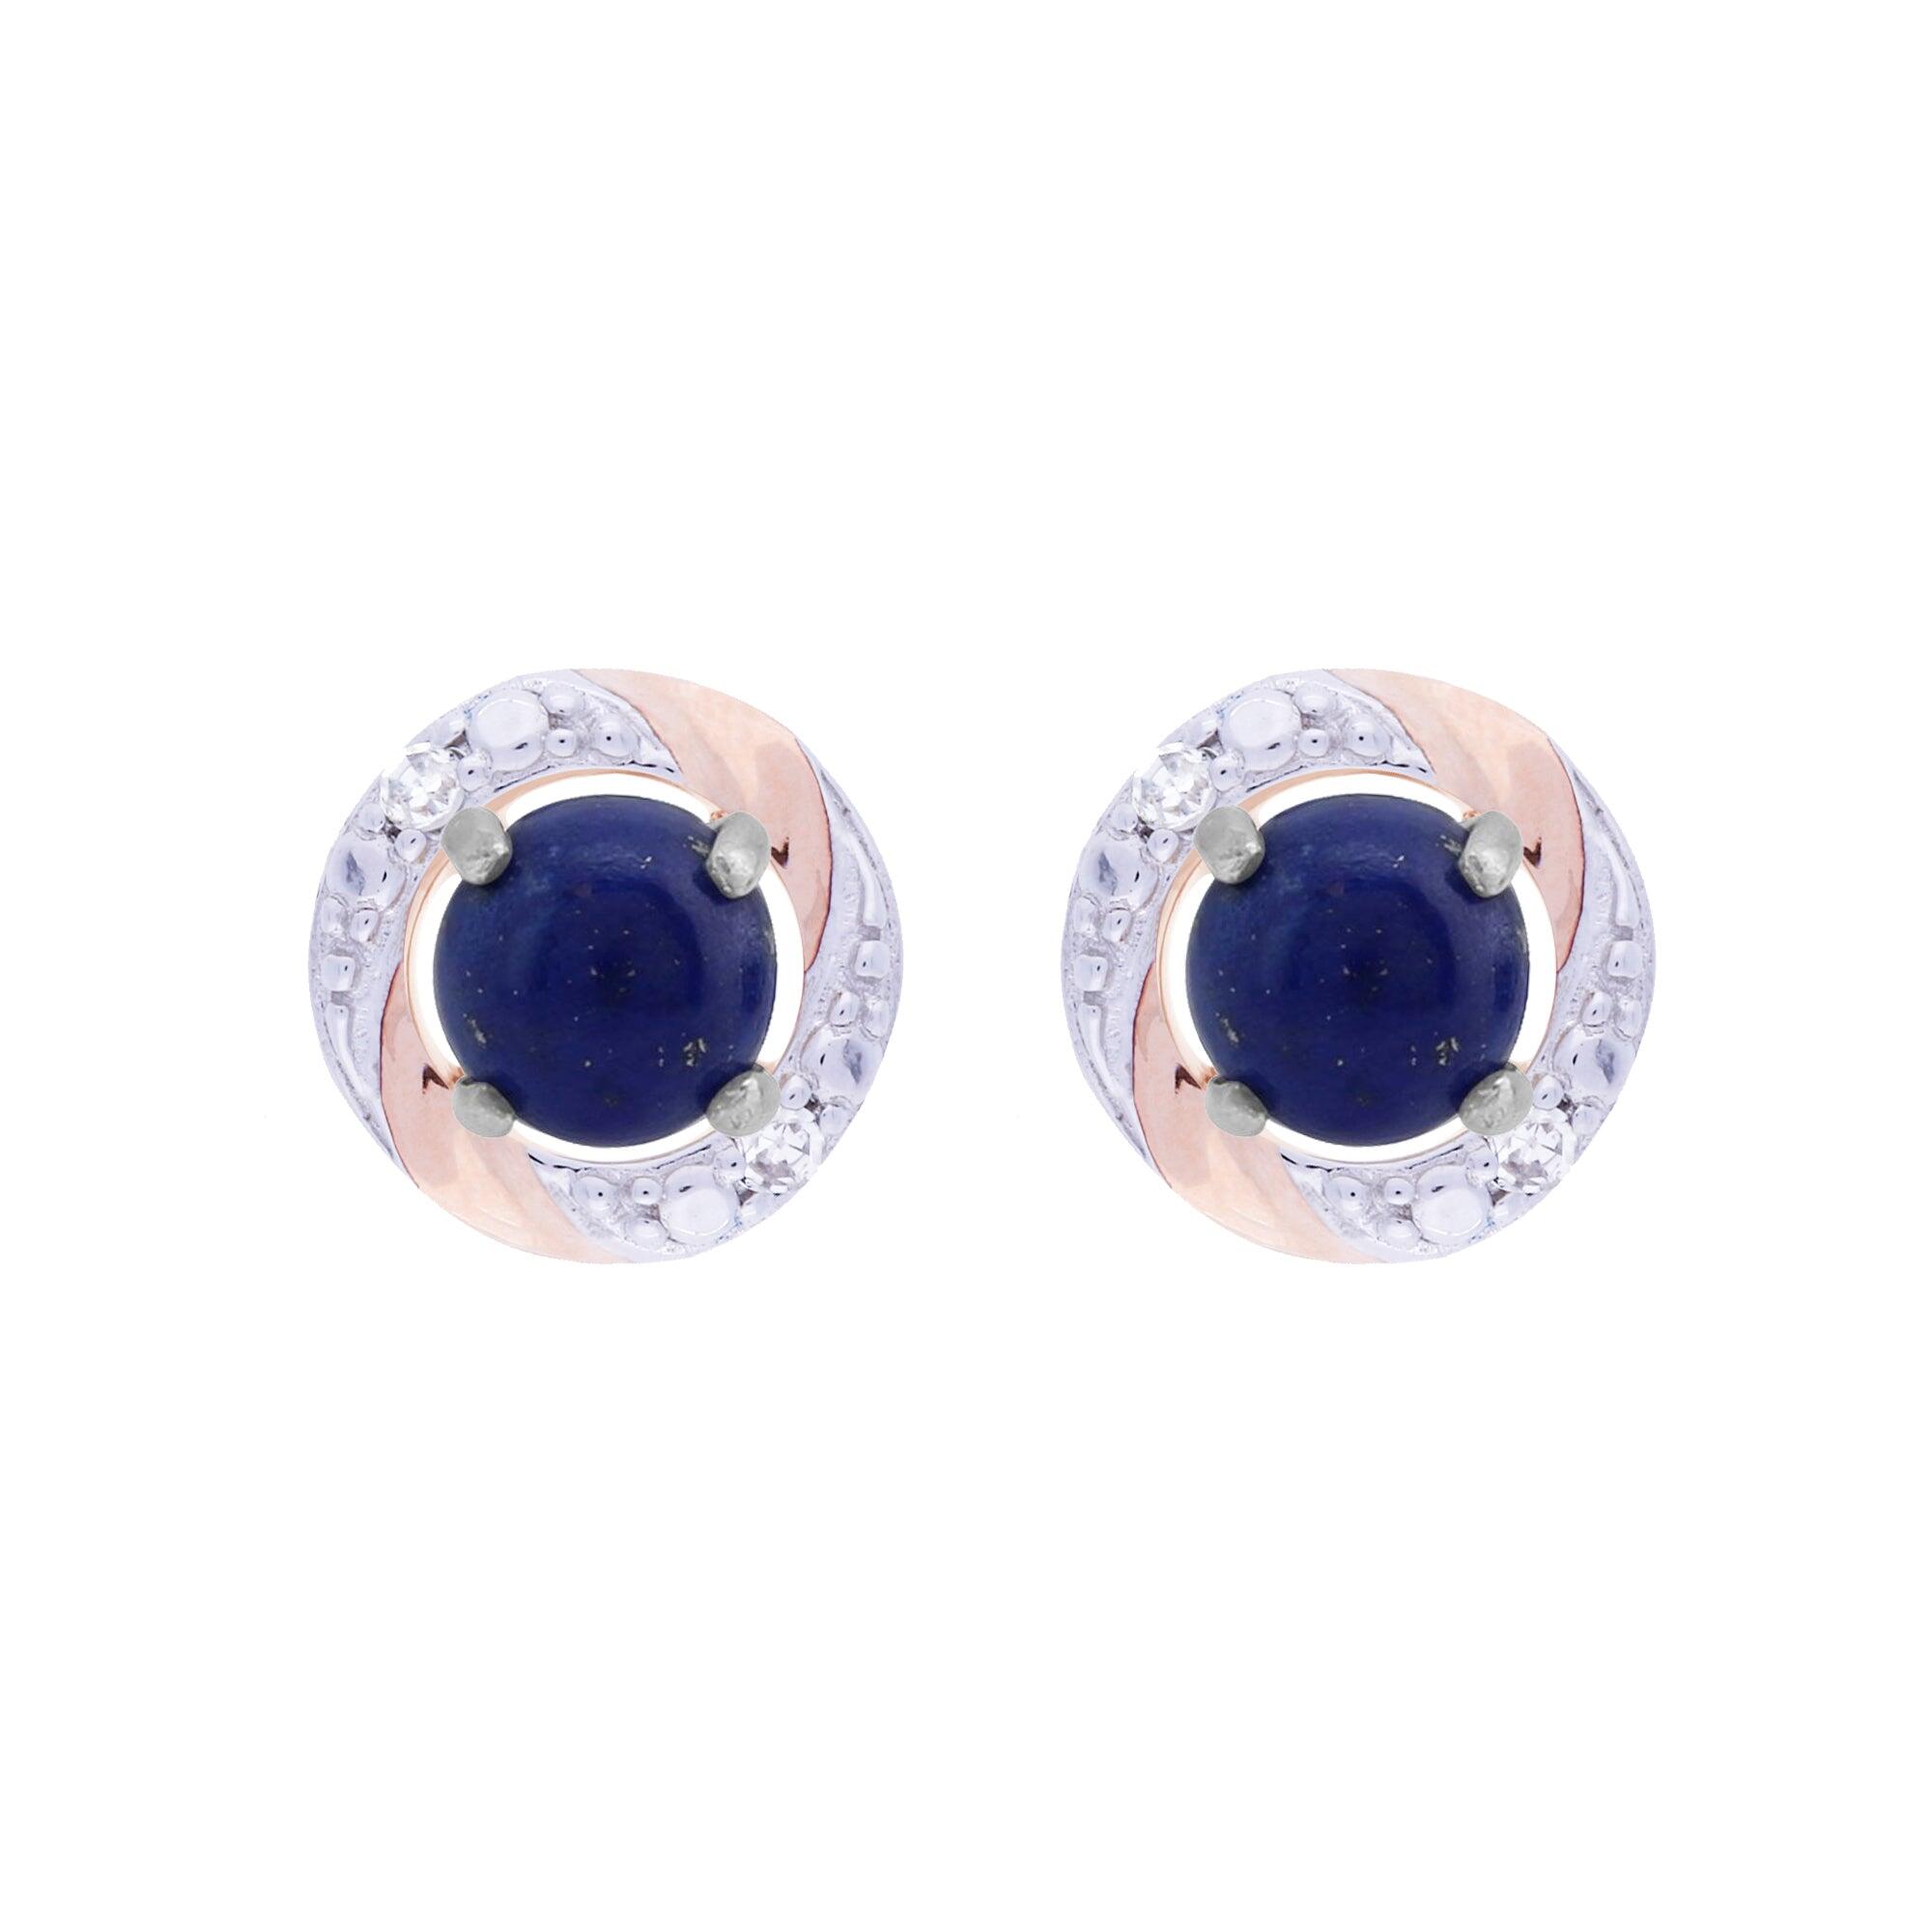 Classic Round Lapis Lazuli Stud Earrings with Detachable Diamond Round Earrings Jacket Set in 9ct White Gold